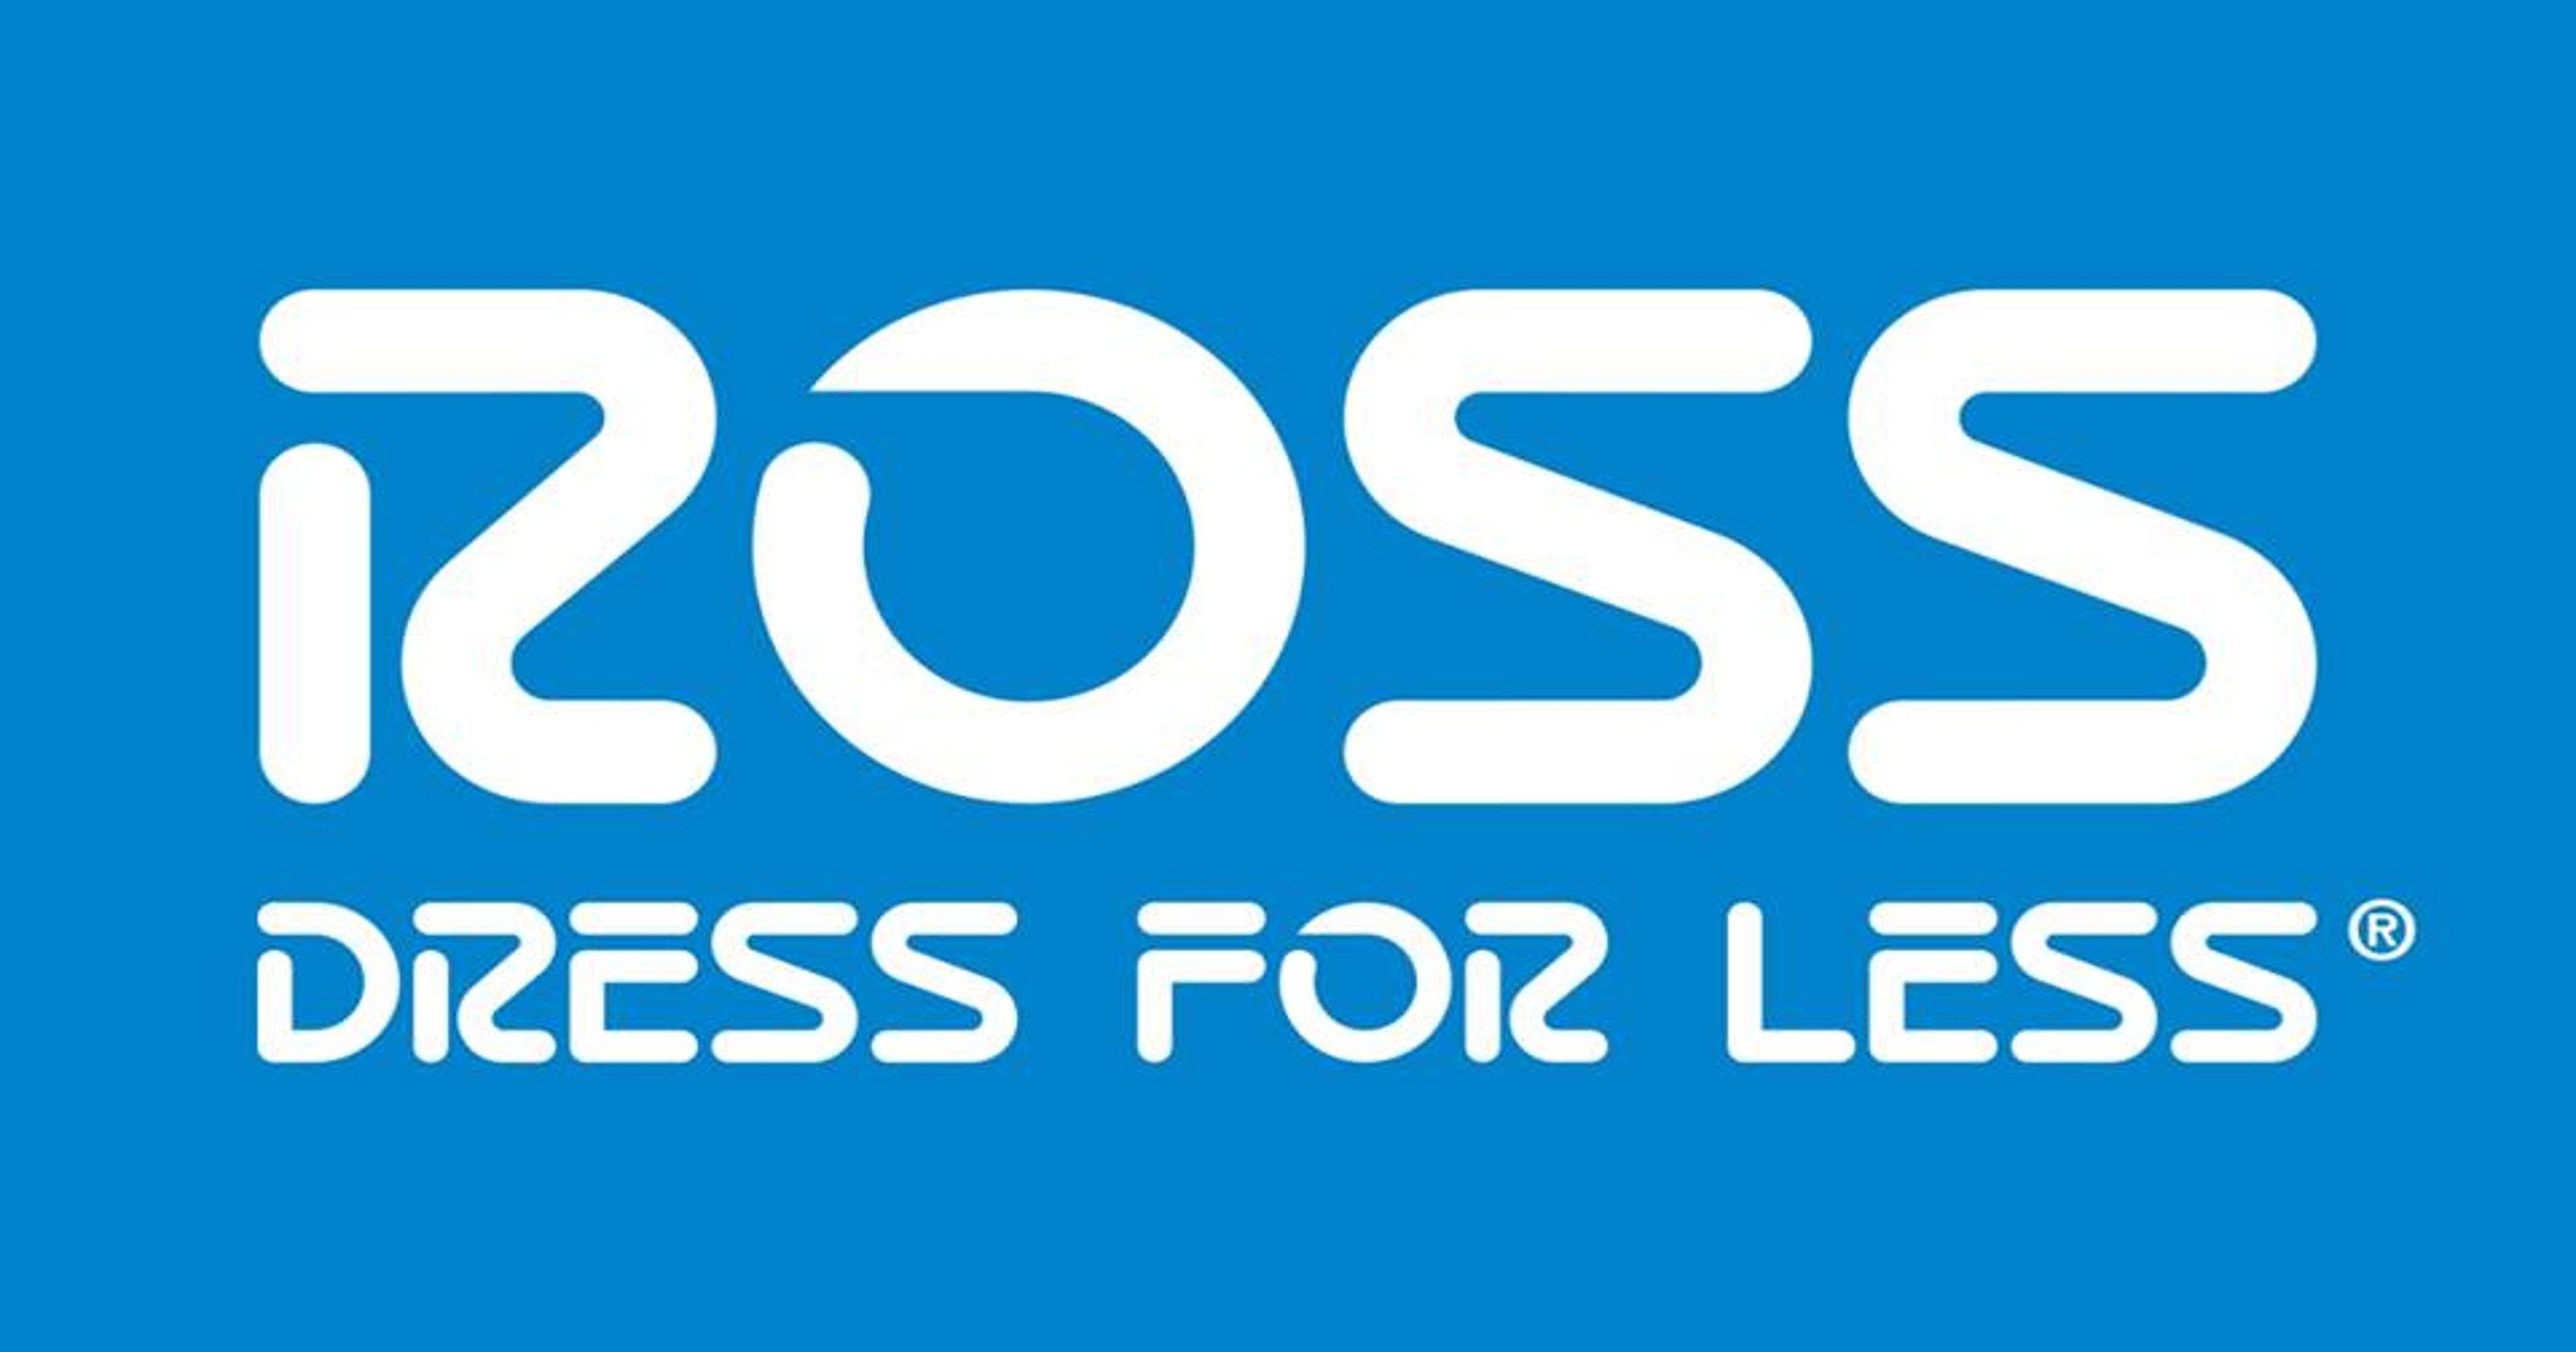 Ross will open store in Red Bluff